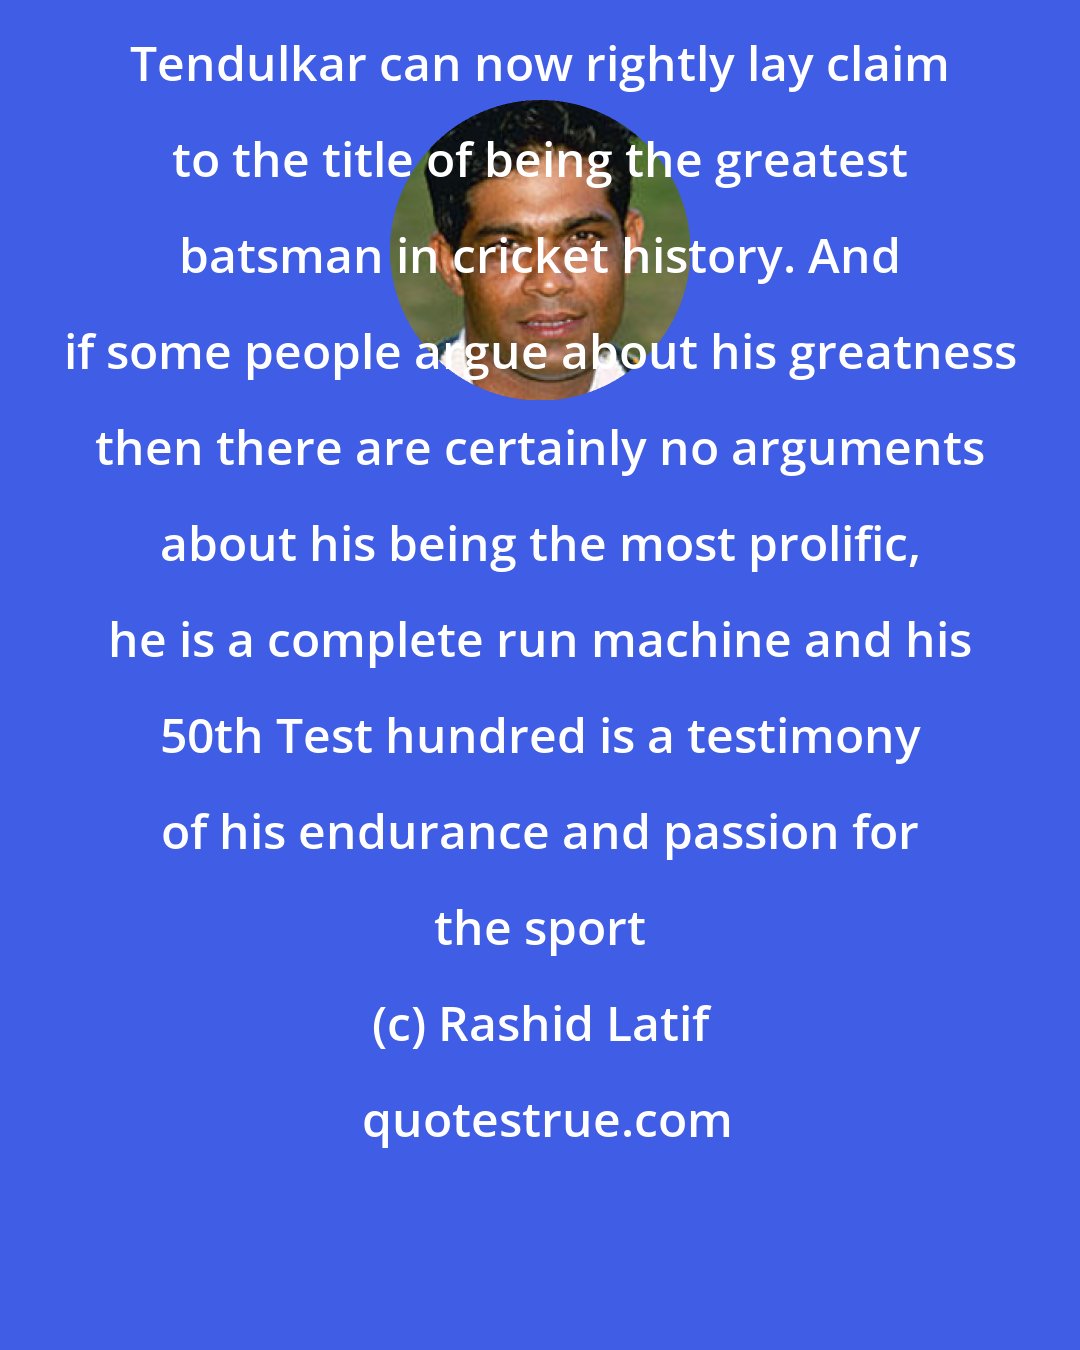 Rashid Latif: Tendulkar can now rightly lay claim to the title of being the greatest batsman in cricket history. And if some people argue about his greatness then there are certainly no arguments about his being the most prolific, he is a complete run machine and his 50th Test hundred is a testimony of his endurance and passion for the sport